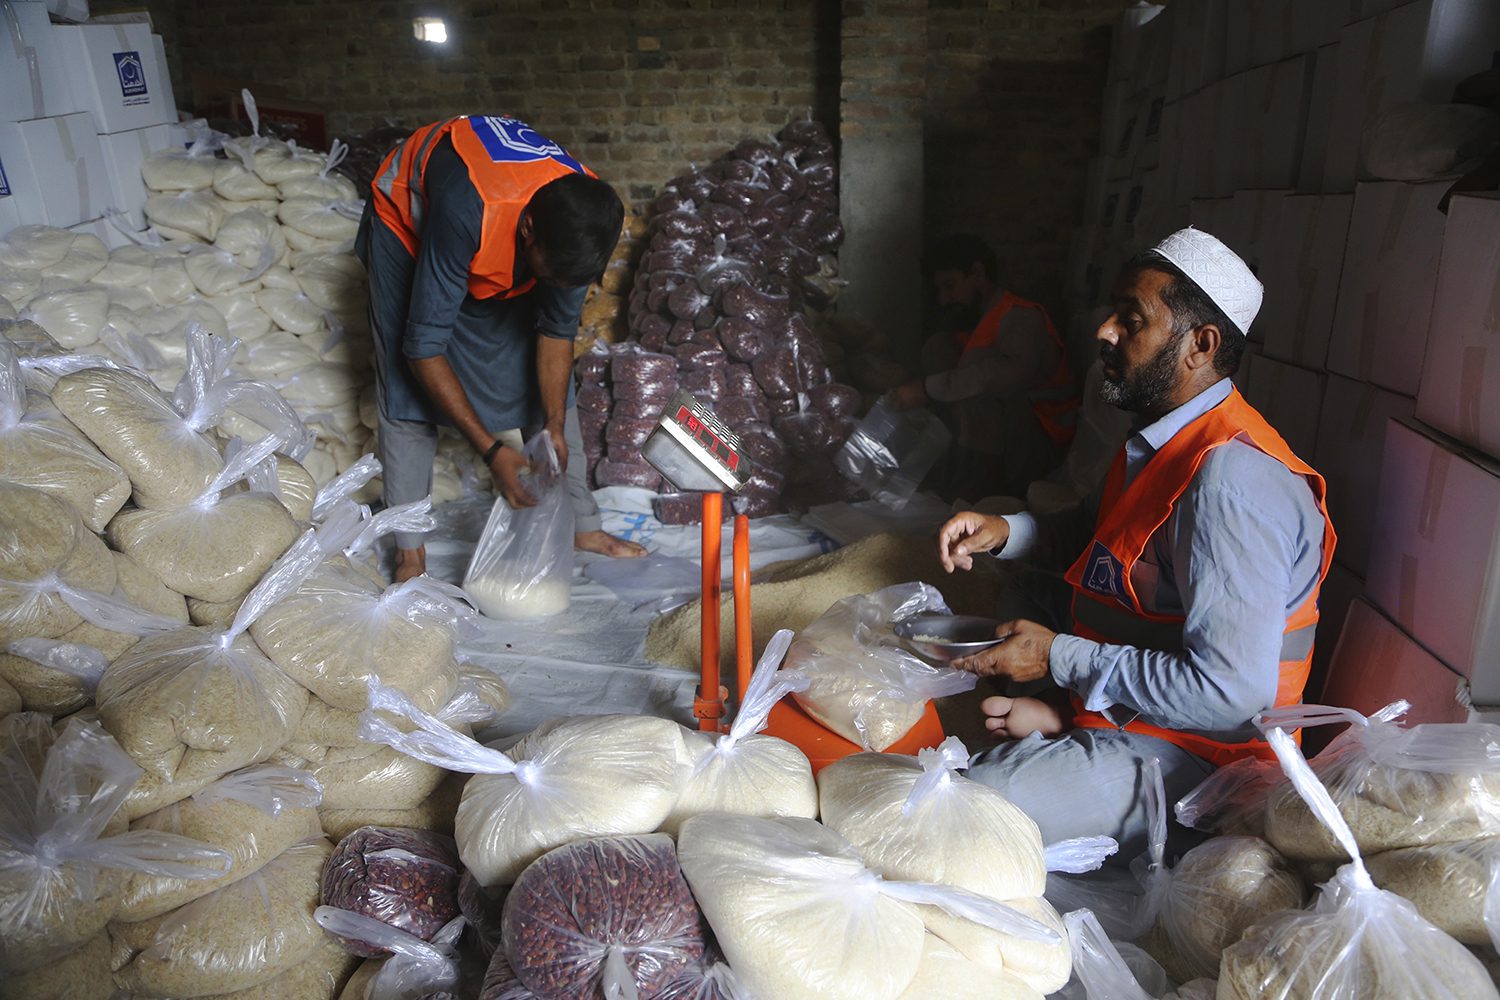 Volunteers form an Islamic charity group prepares food packets to be send into flood-hit areas, in Peshawar, Pakistan, Friday, Aug. 26, 2022. Pakistan's government in an overnight appeal sought relief assistance from the international community for flood-affected people in this impoverished Islamic nation, as the exceptionally heavier monsoon rain in recent decades continued lashing various parts of the country, killing more people and raising the overall death toll from mid-June to 937. (AP Photo/Muhammad Sajjad)